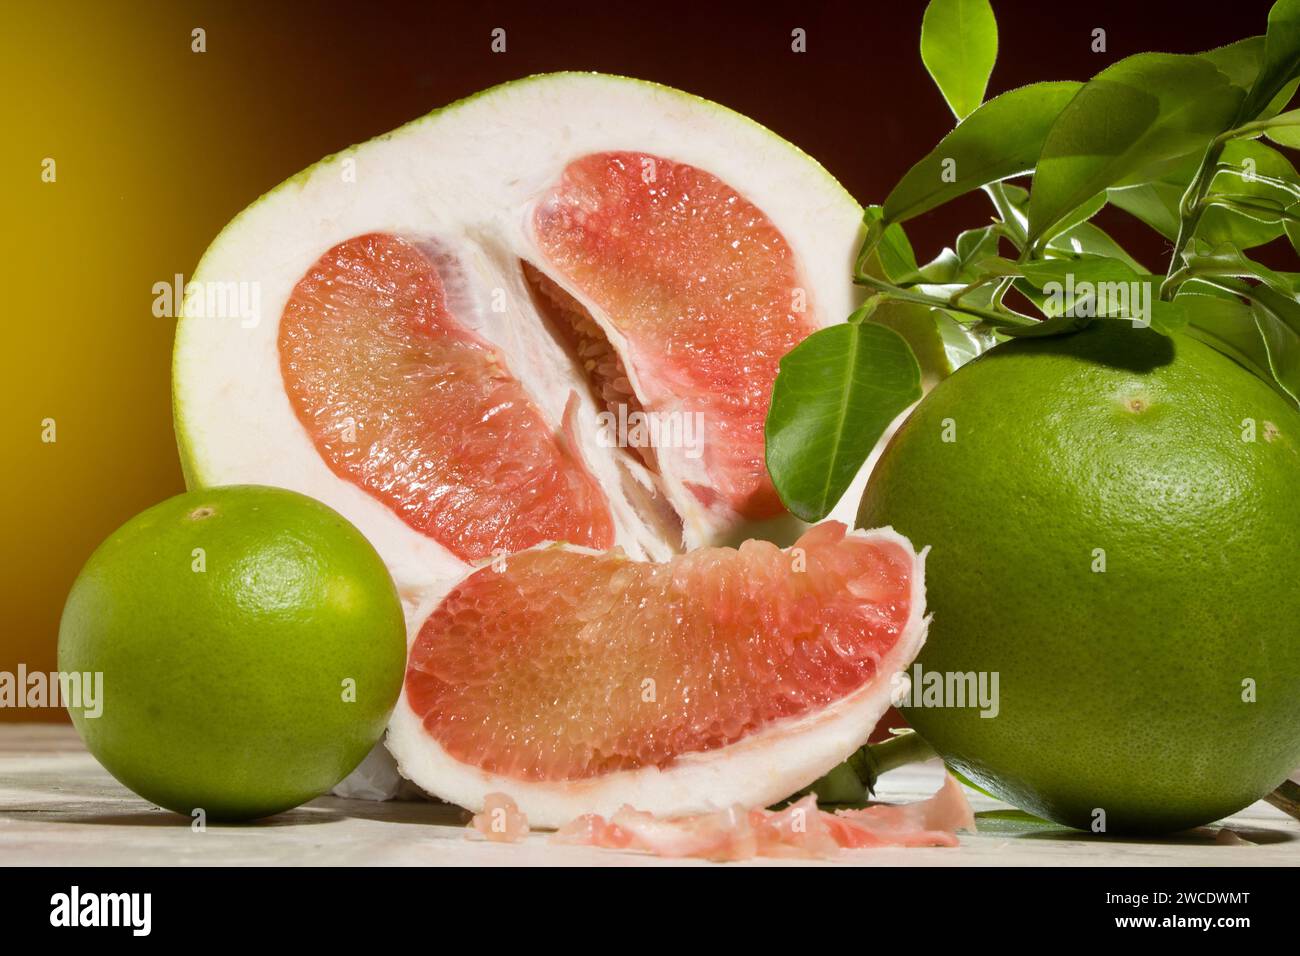 pieces of red Pomelo fruit on an orange background Stock Photo